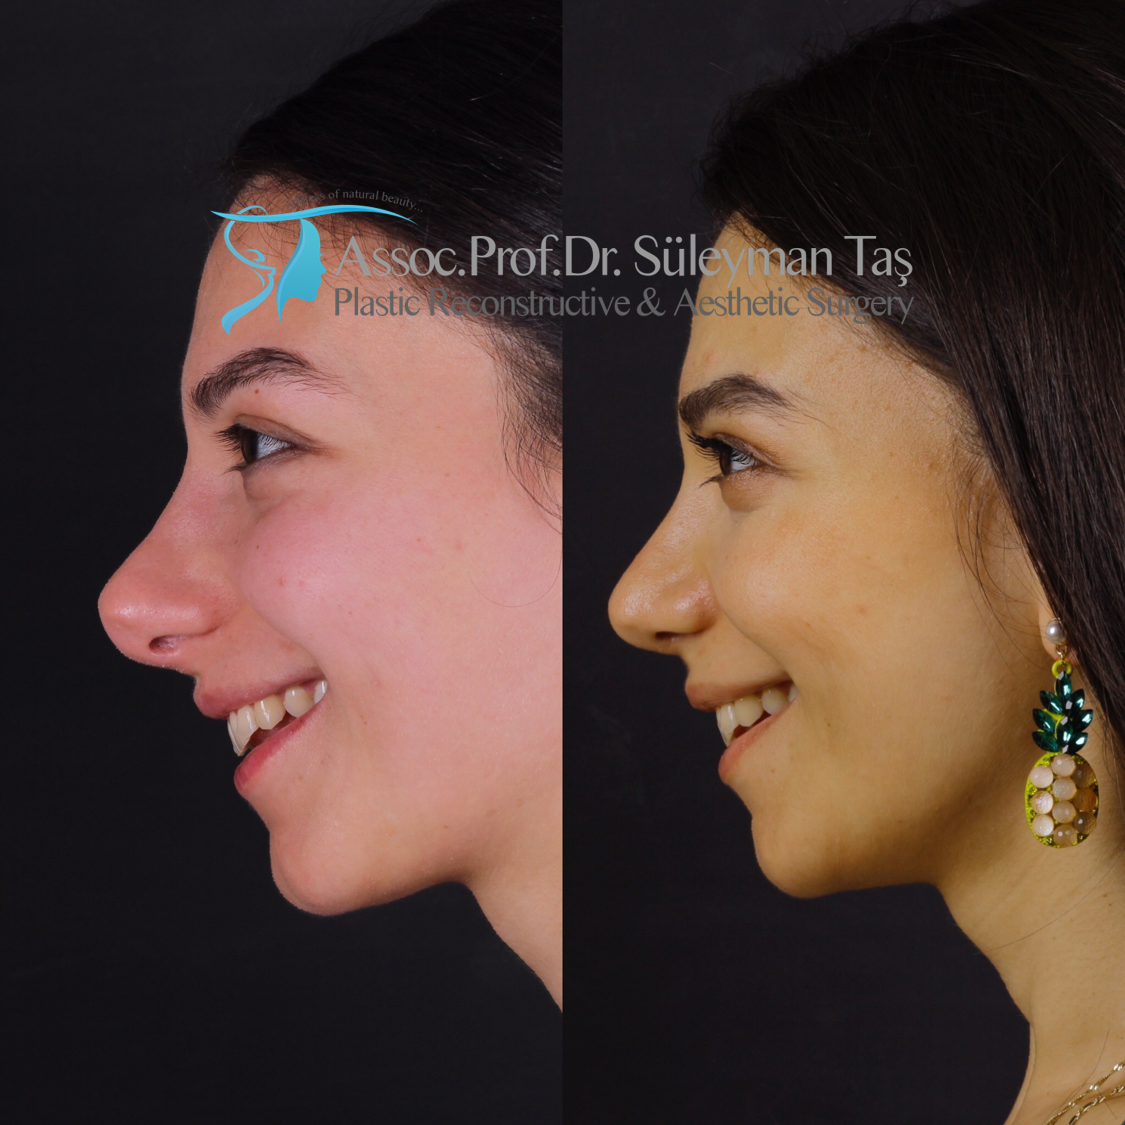 Revision rhinoplasty before and after